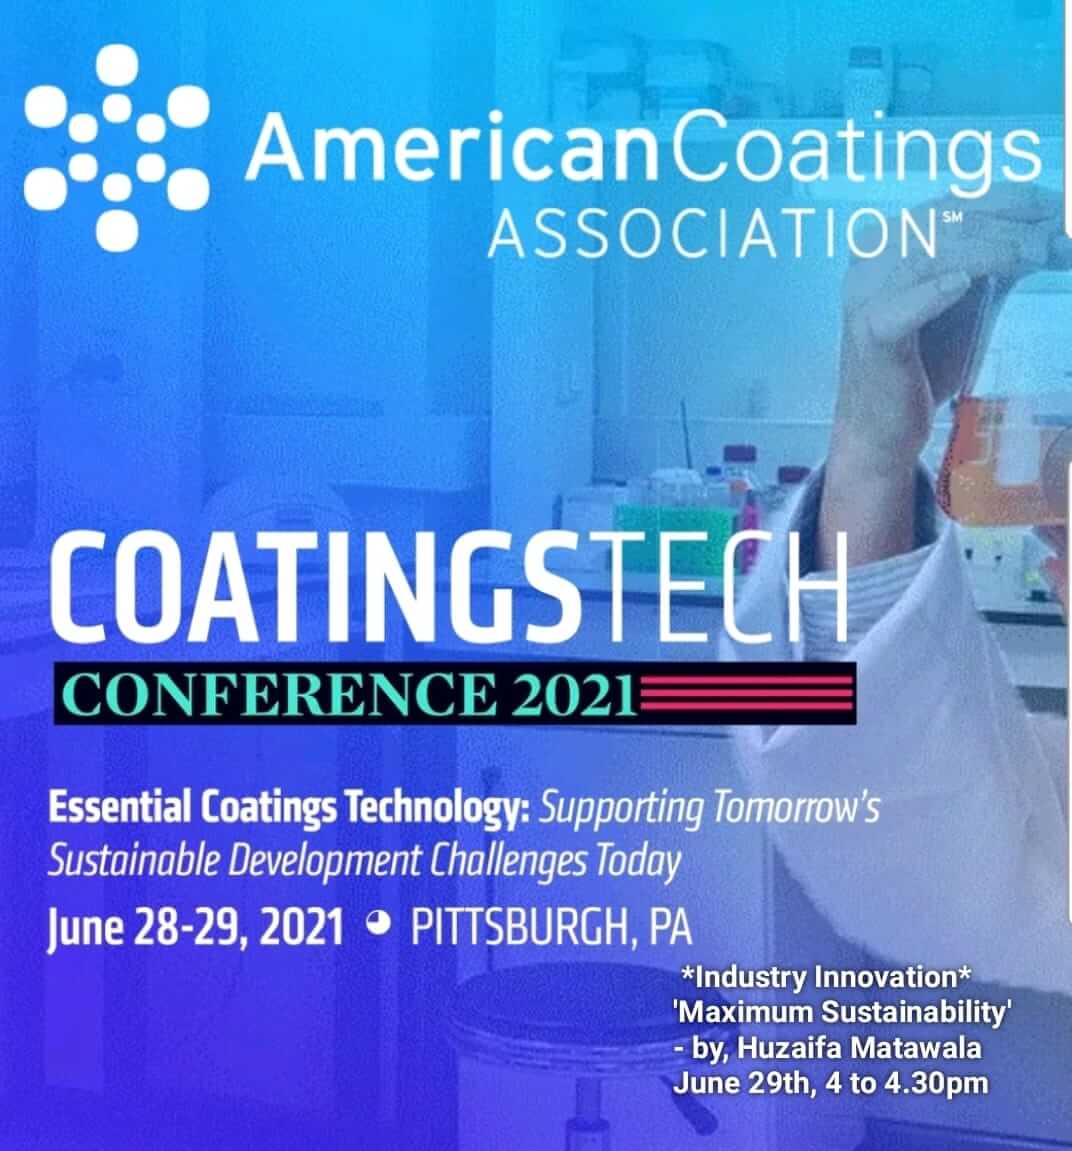 Coatings Tech 2021 Conference